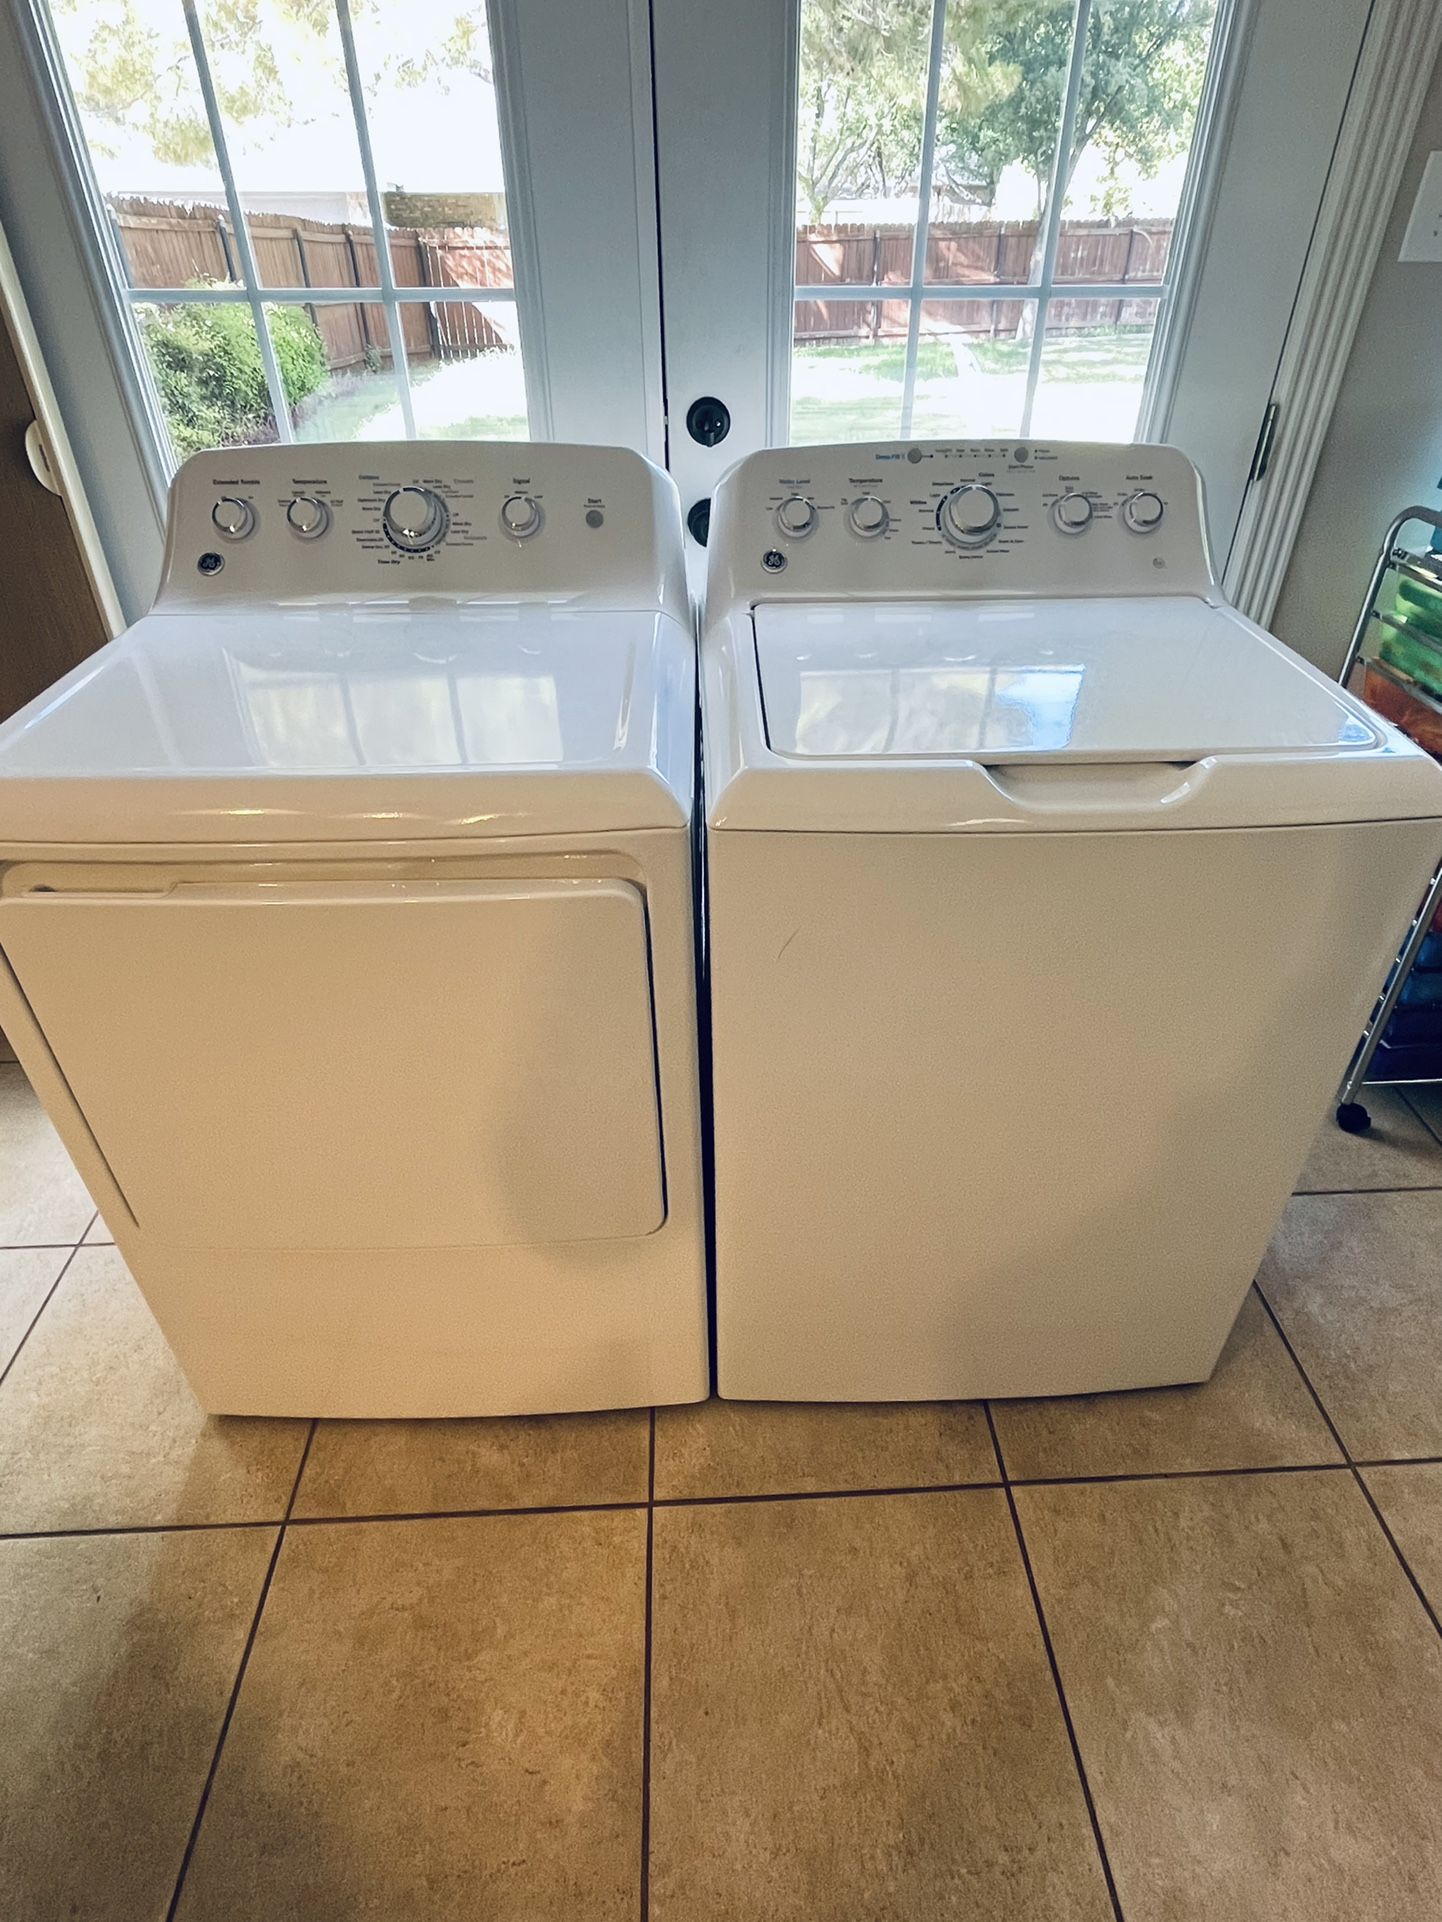 GE Washer/Dryer With Lowes Warranty